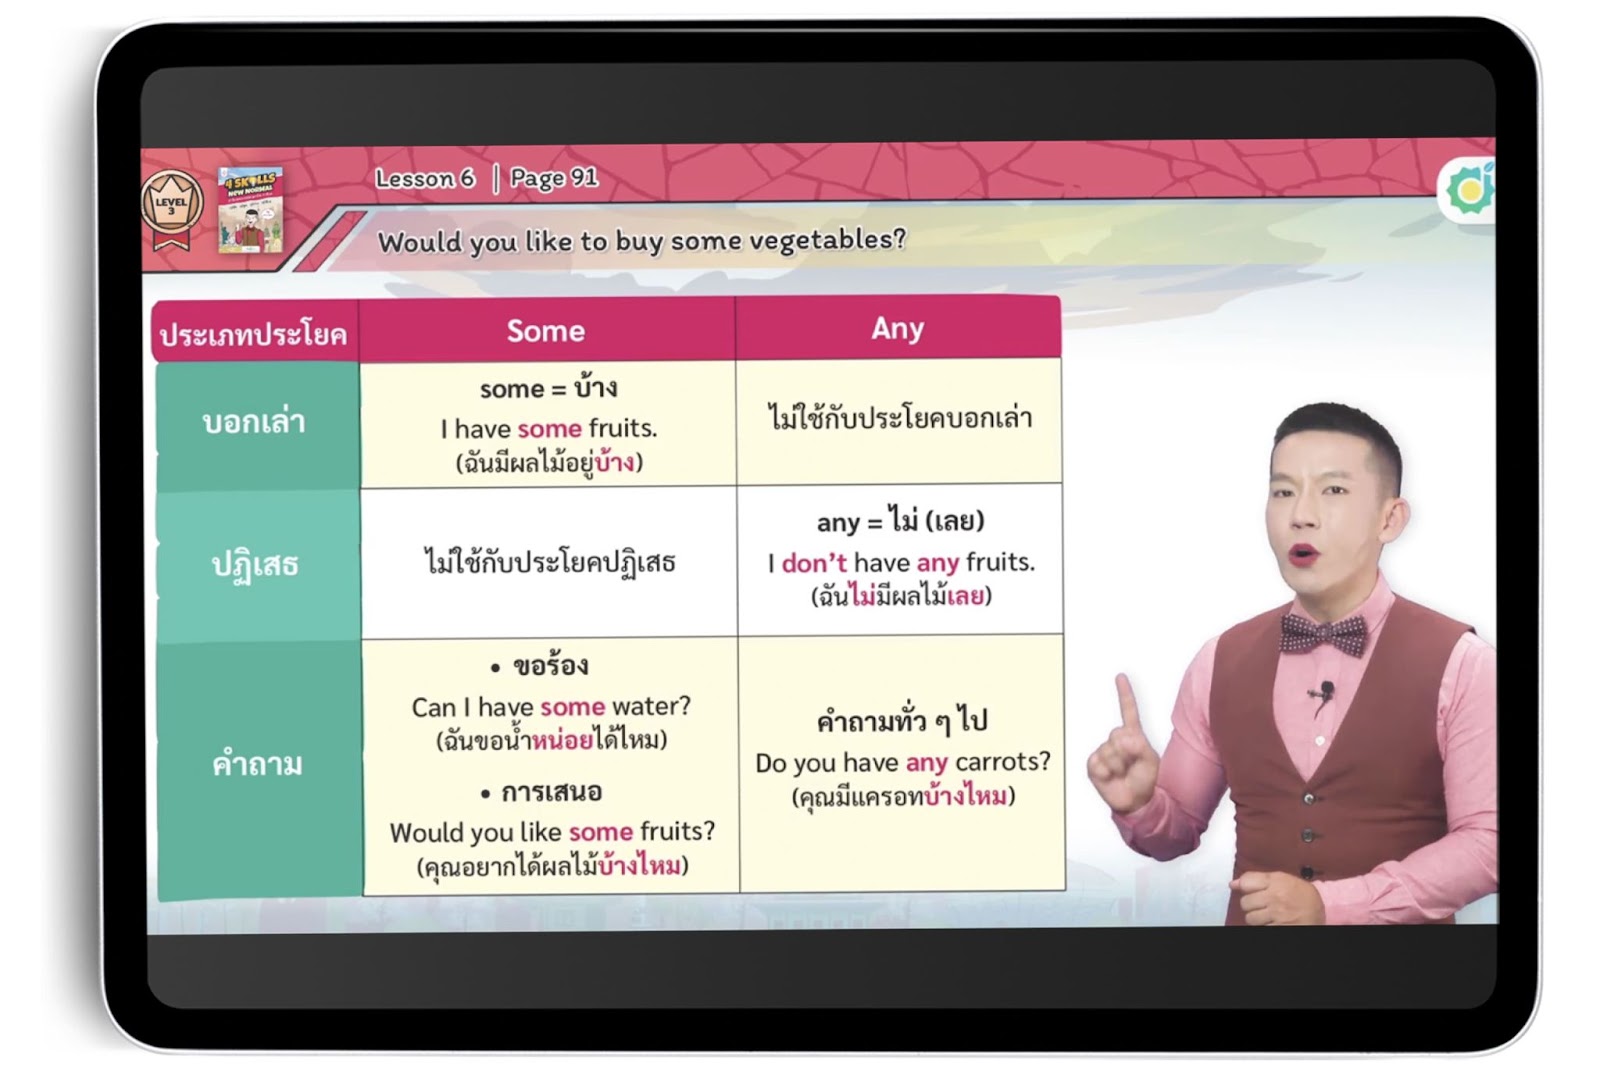 a tutorial video with a tutor explaining a grammar concept playing on an iPad screen